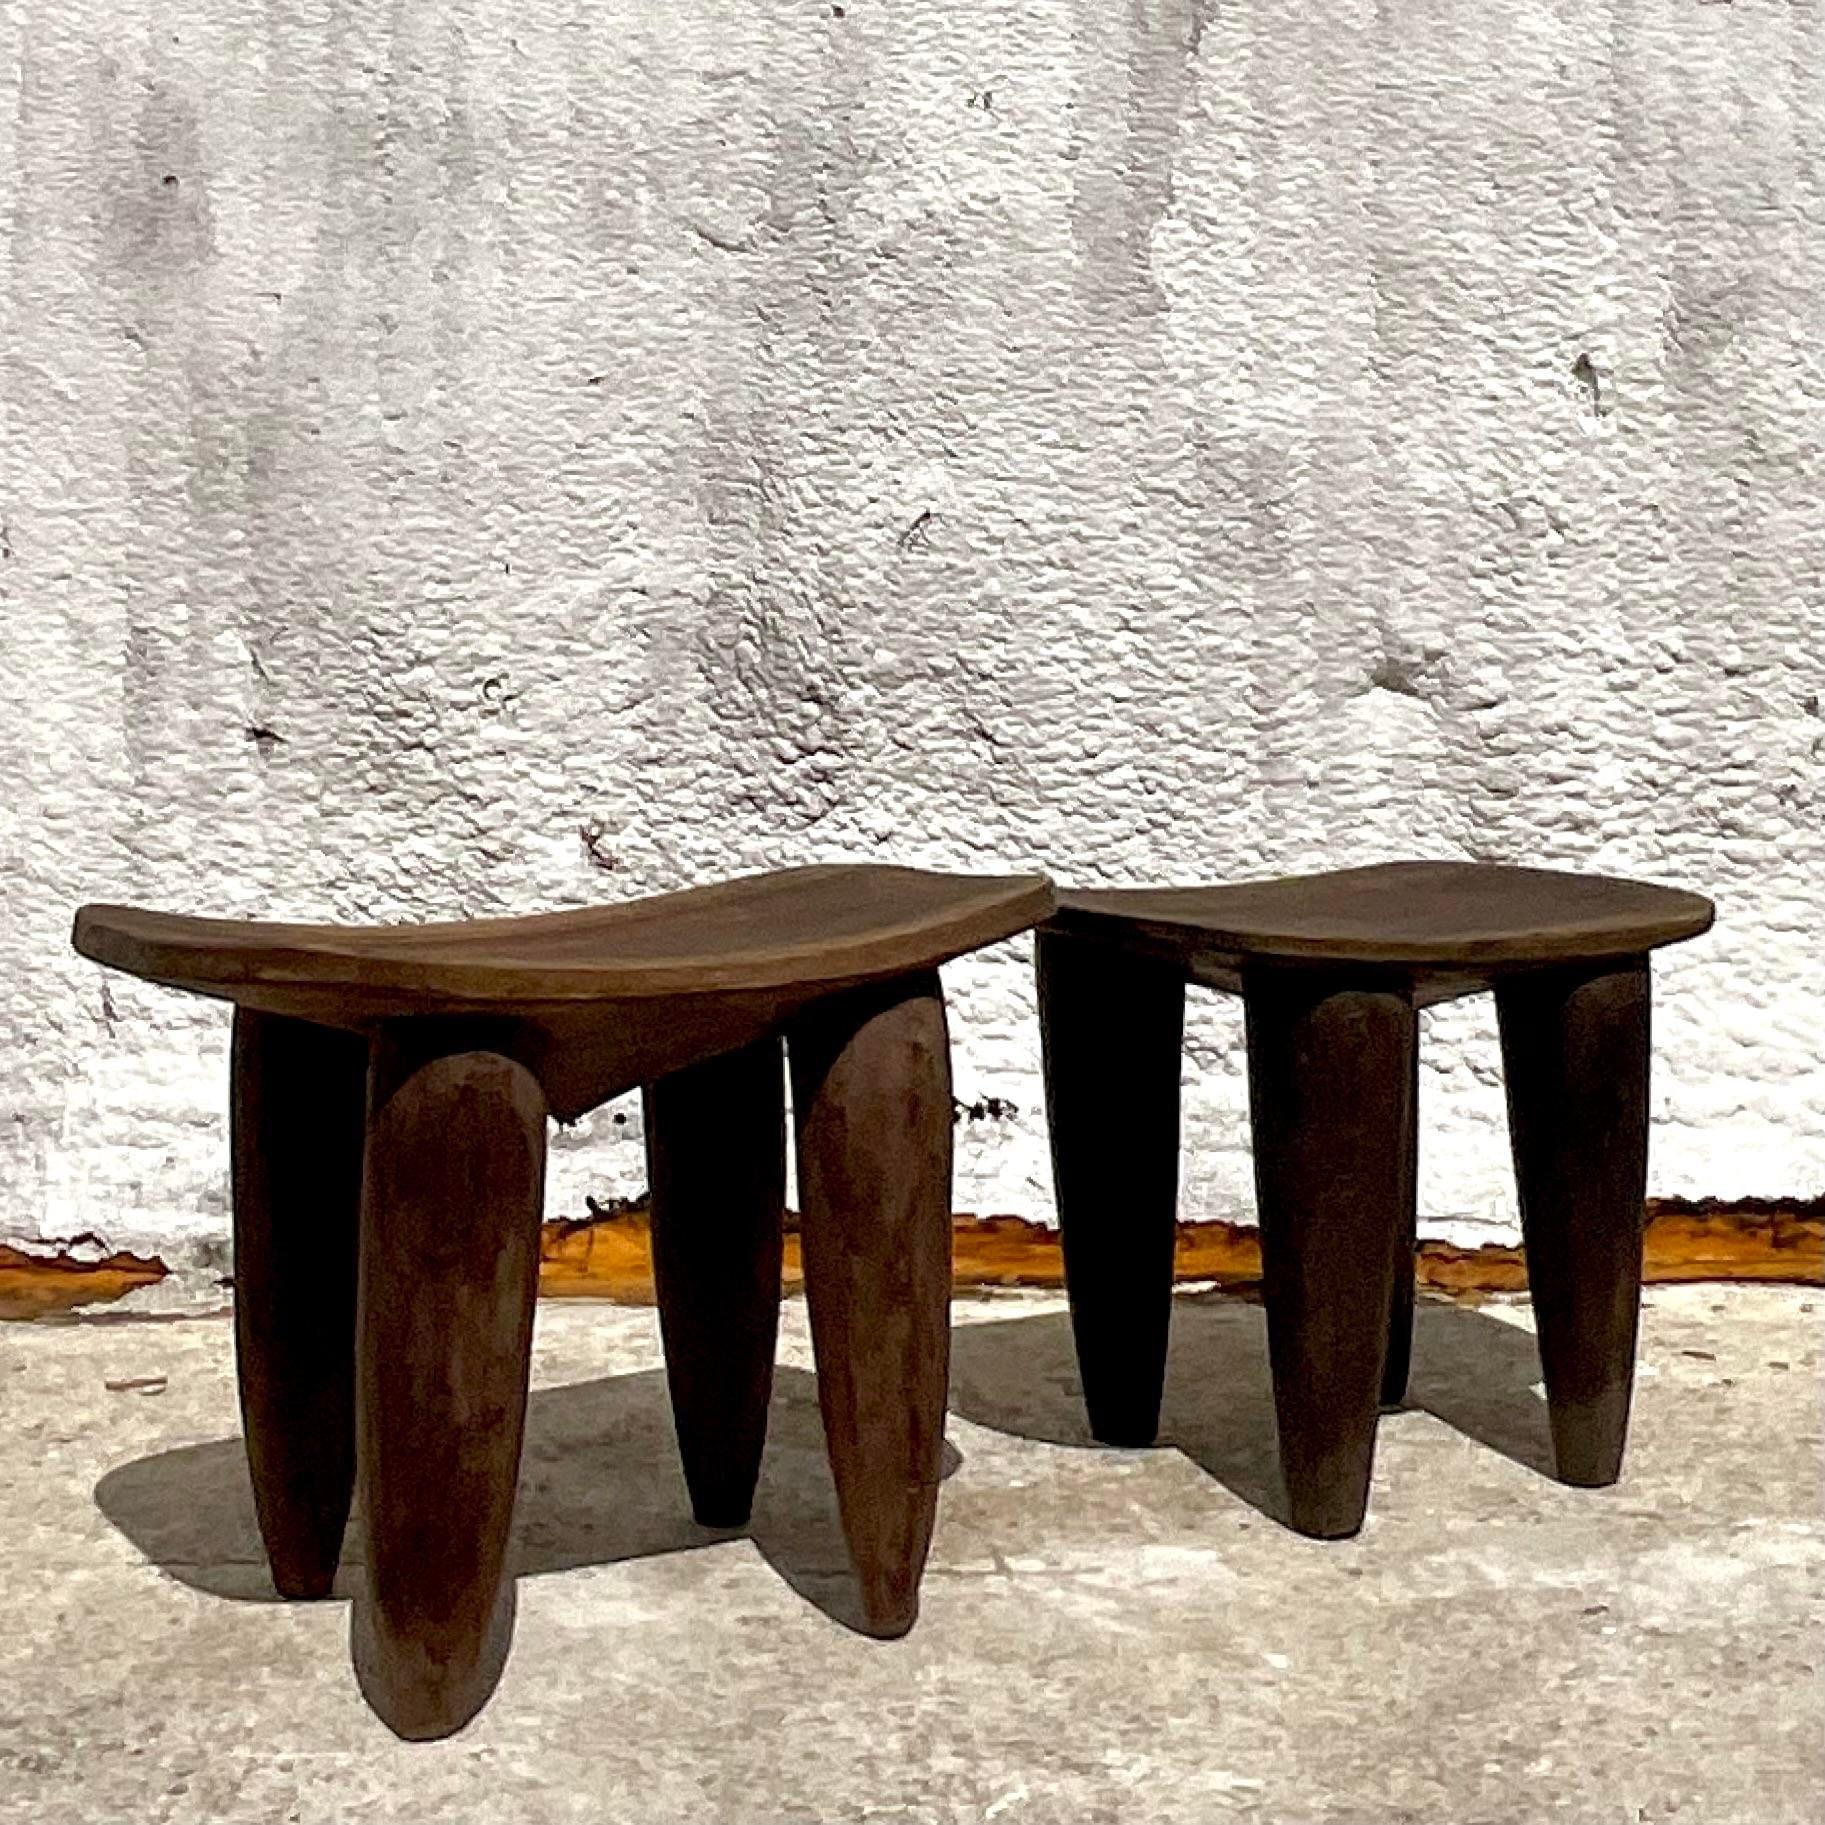 Late 20th Century Vintage Boho African Senufo Low Stools - a Pair In Good Condition For Sale In west palm beach, FL